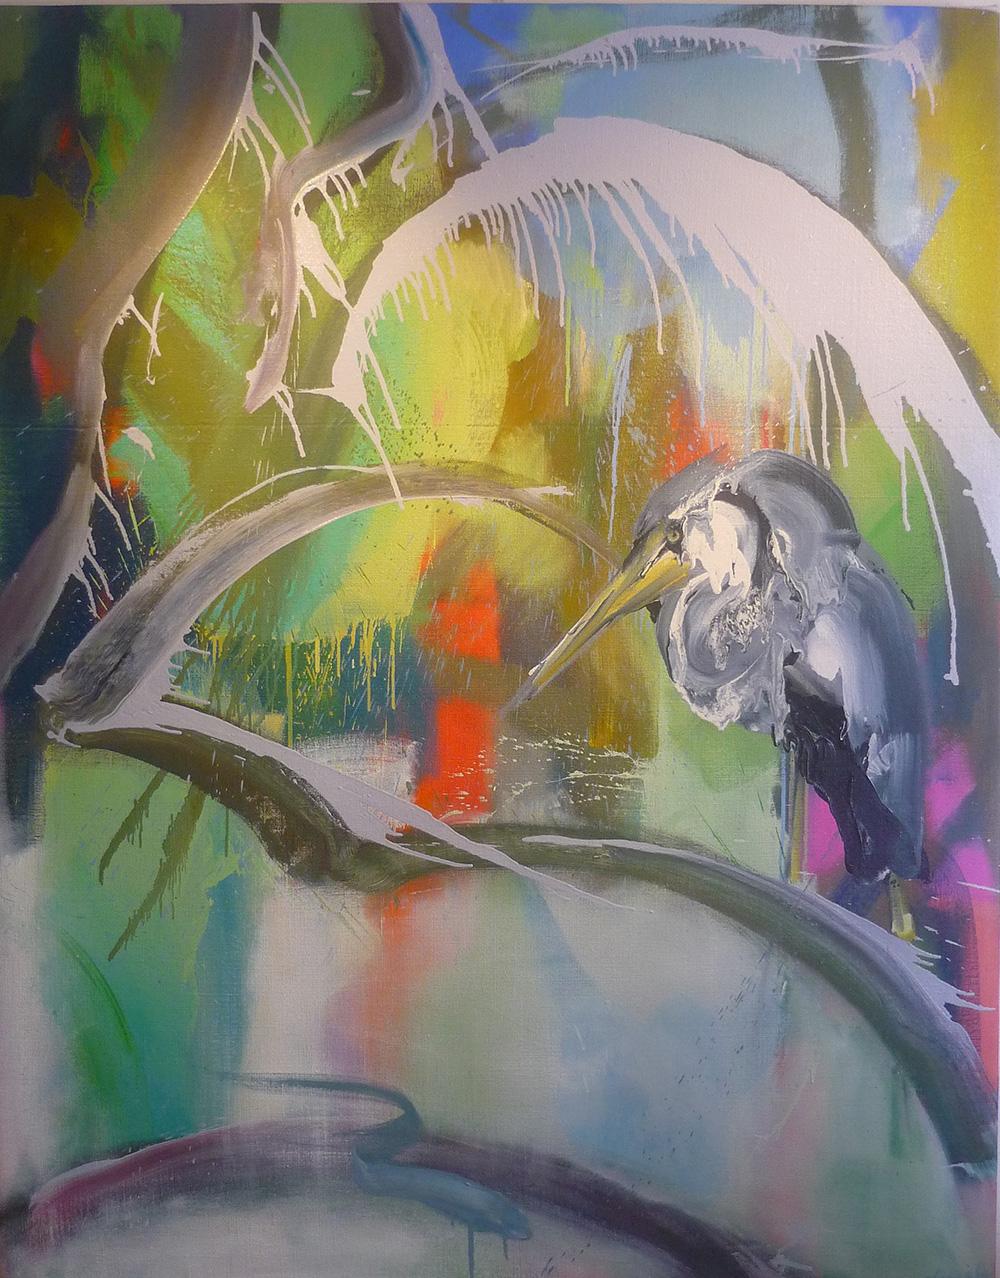 Indulto by Christophe Dupety - Contemporary painting, bright colours, bird